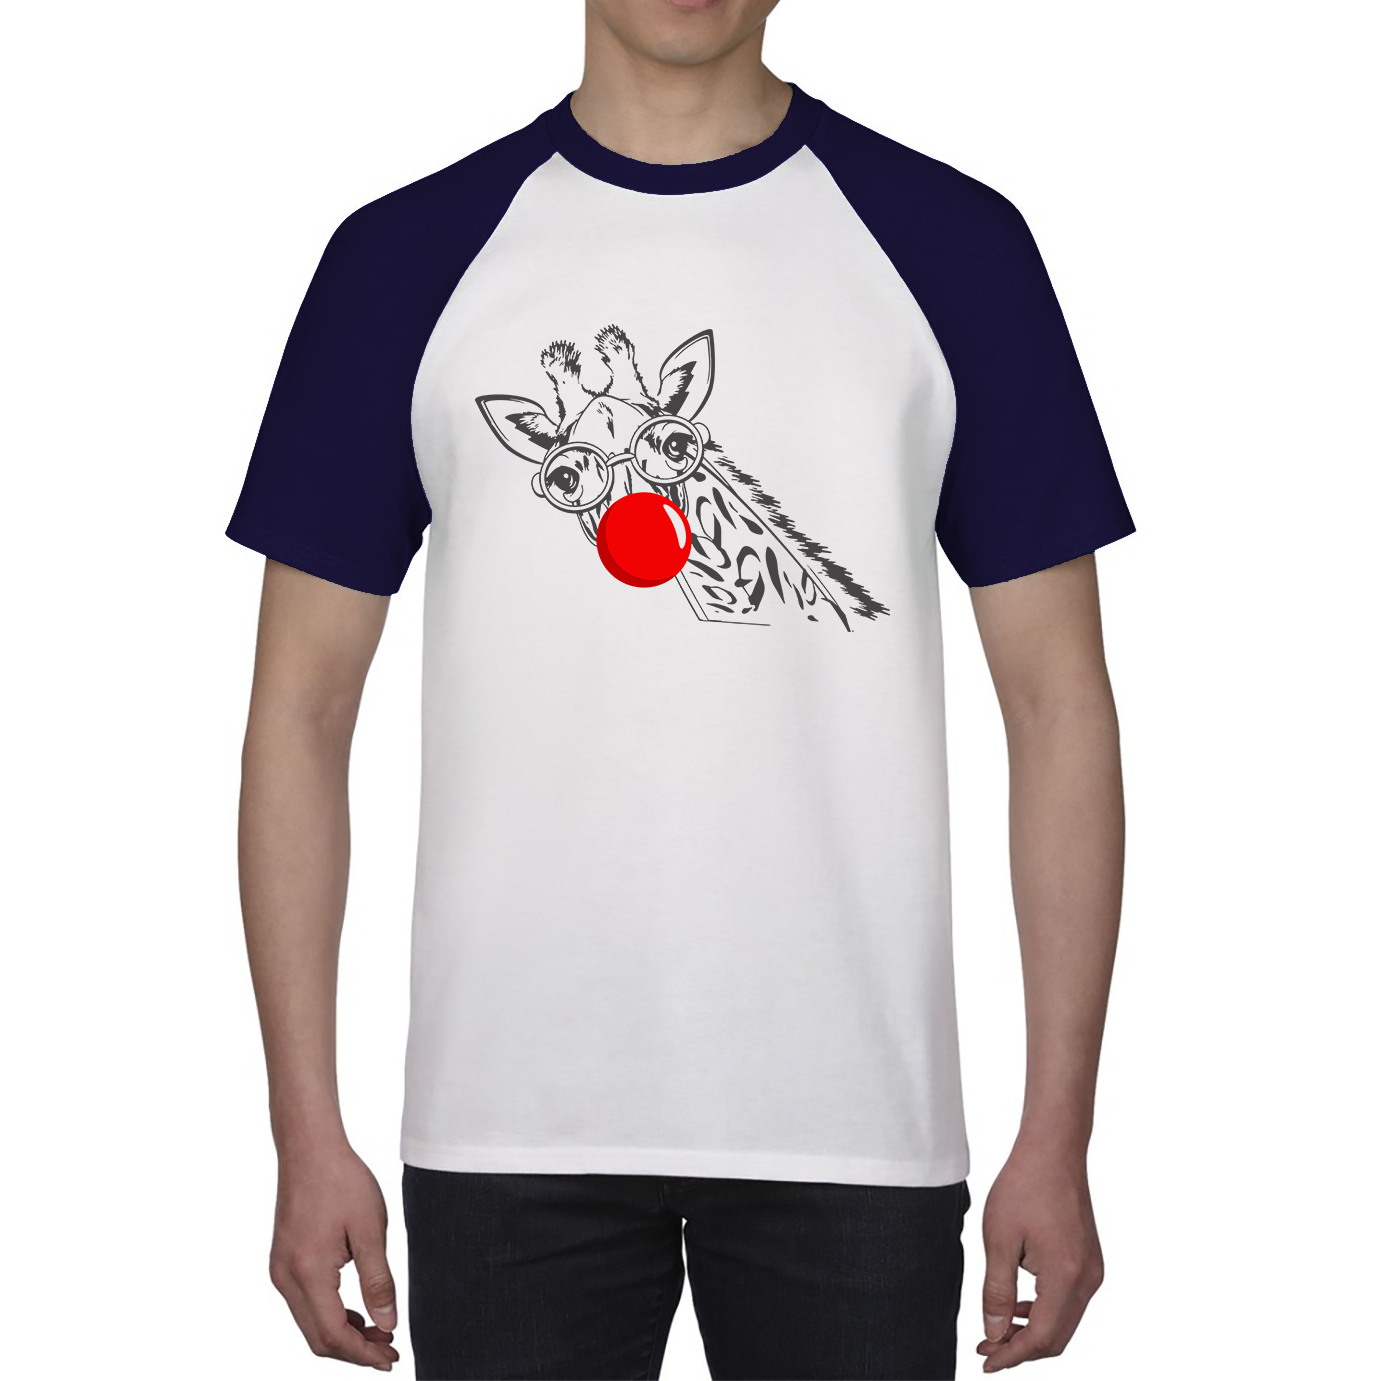 Giraffe Red Nose Day Baseball T Shirt. 50% Goes To Charity